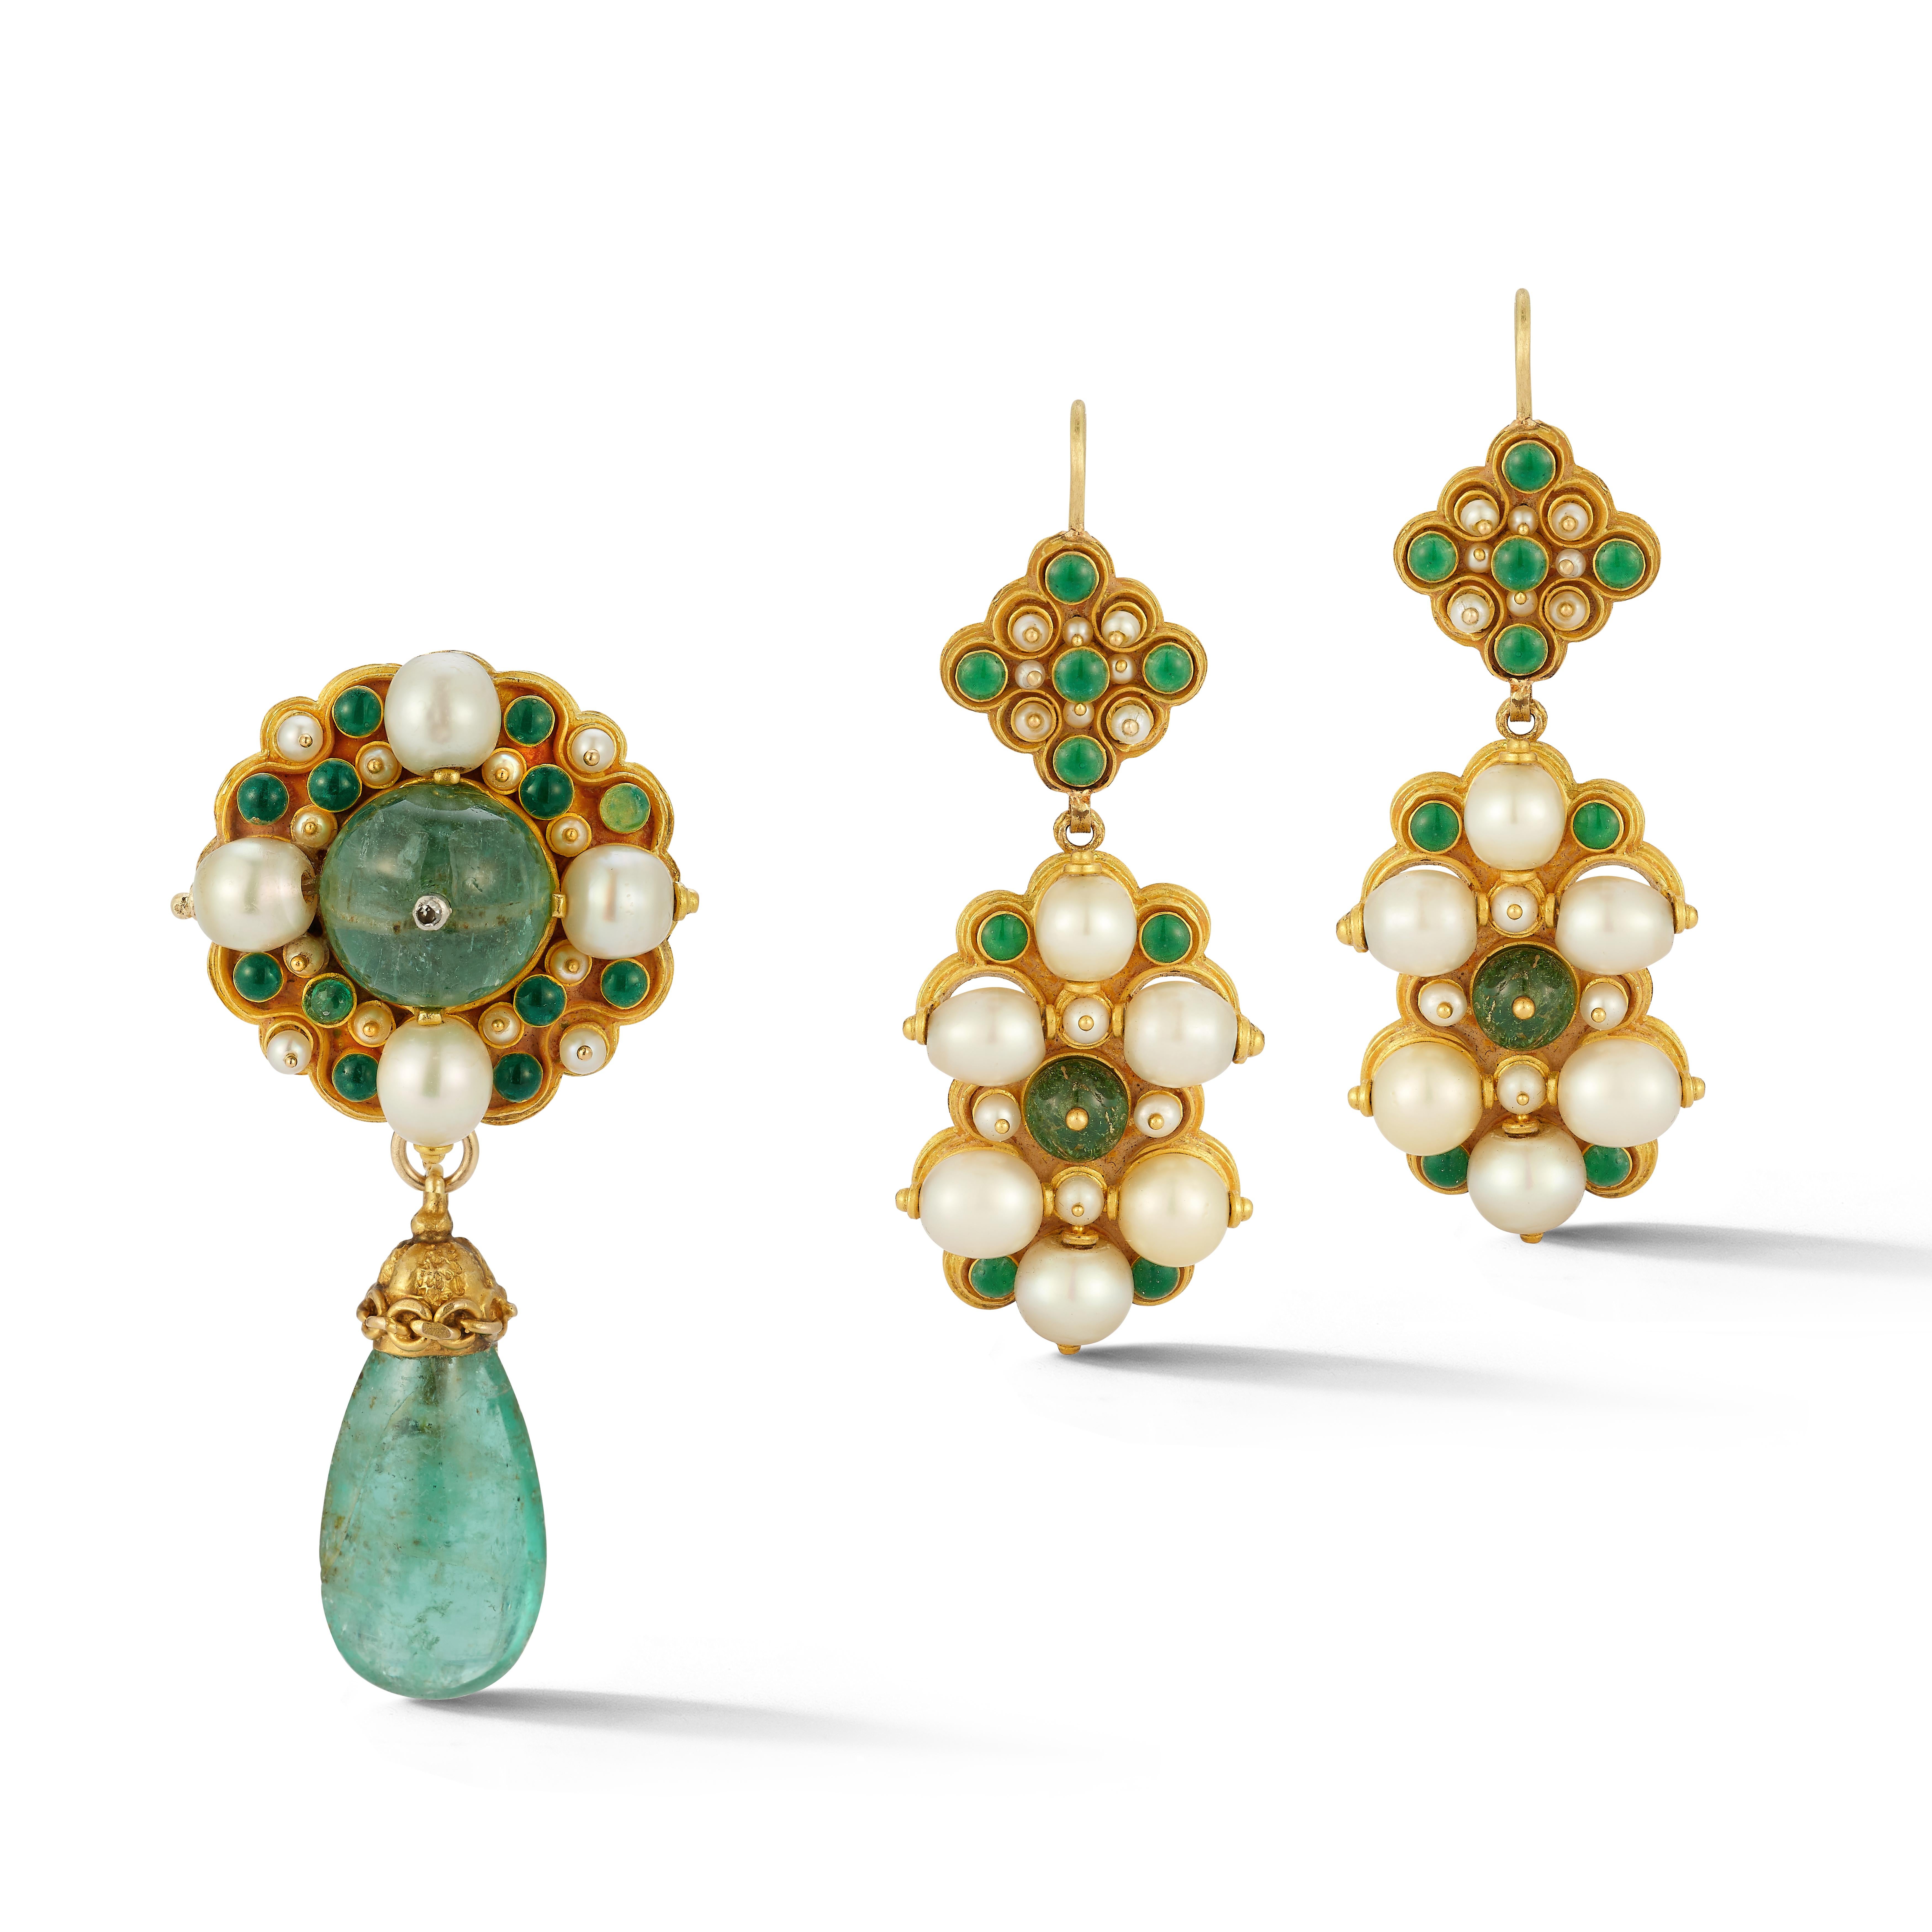 Antique Emerald Pearl and Enamel Brooch & Earrings Set

Circa 1907

A set of antique enamel earrings and brooch consisting of pearls and emeralds set in gold

Earrings Length: 2.25